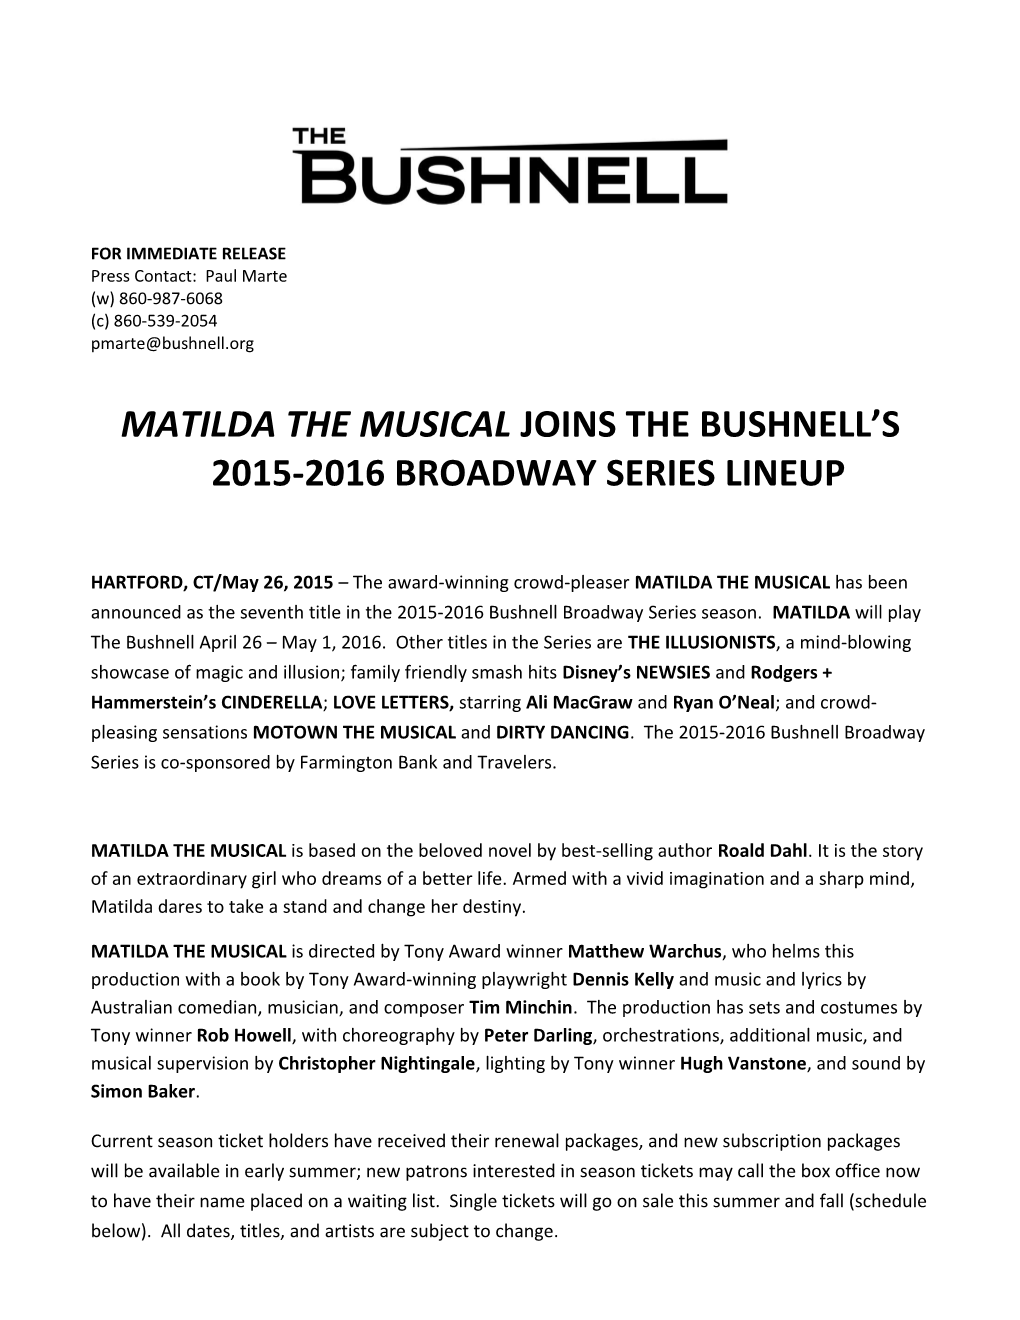 Matilda the Musical Joins the Bushnell S 2015-2016Broadway Series Lineup